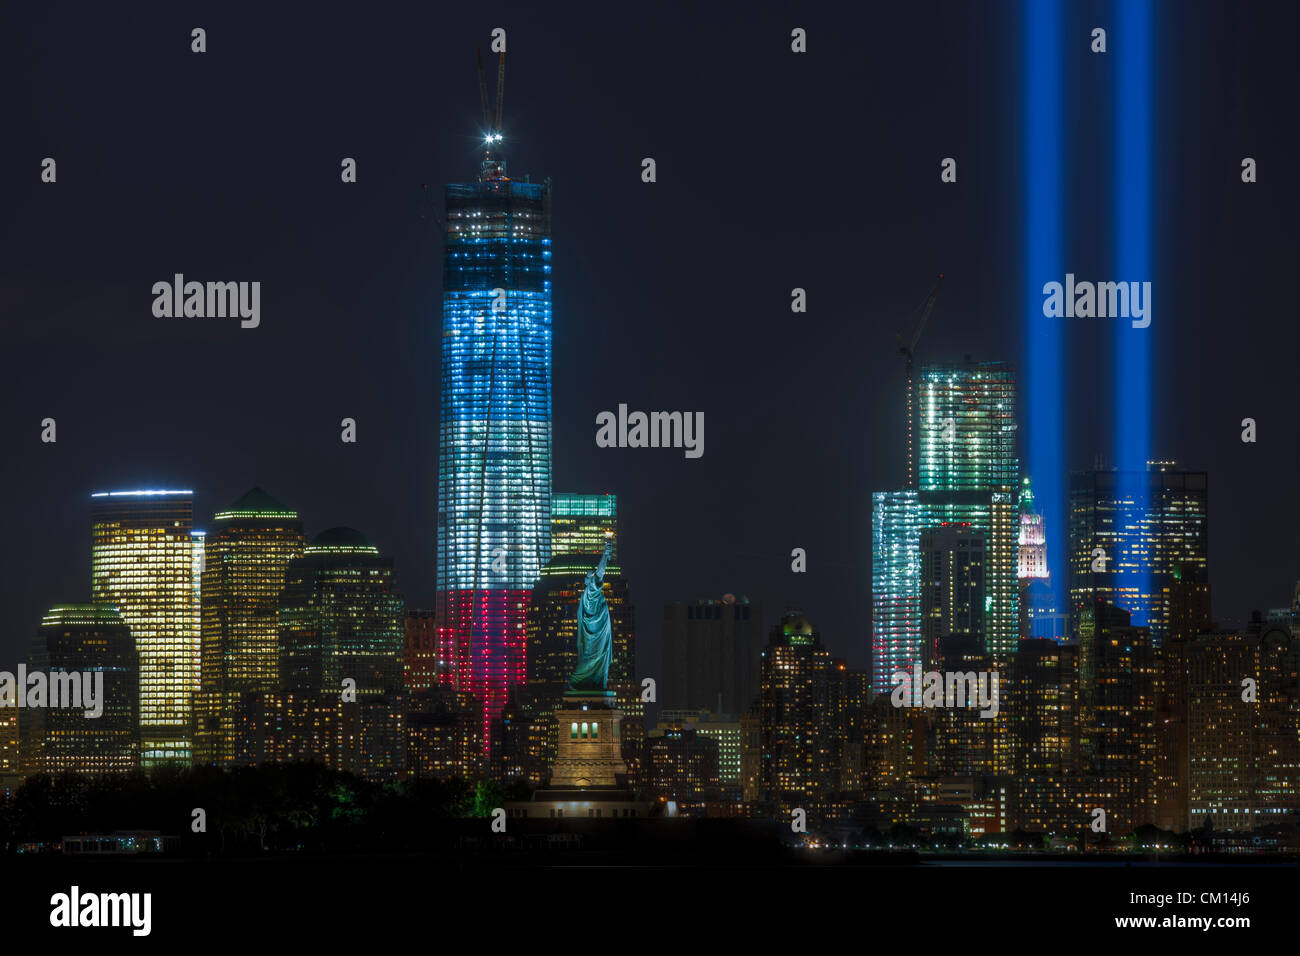 The twin beams of light of the Tribute in Light, an annual remembrance of the events of September 11, 2001, shine into the night sky in New York City over the skyline of lower Manhattan.  This view of the skyline includes two symbols of freedom, the Statue of Liberty and the Freedom Tower (One World Trade Center). Stock Photo